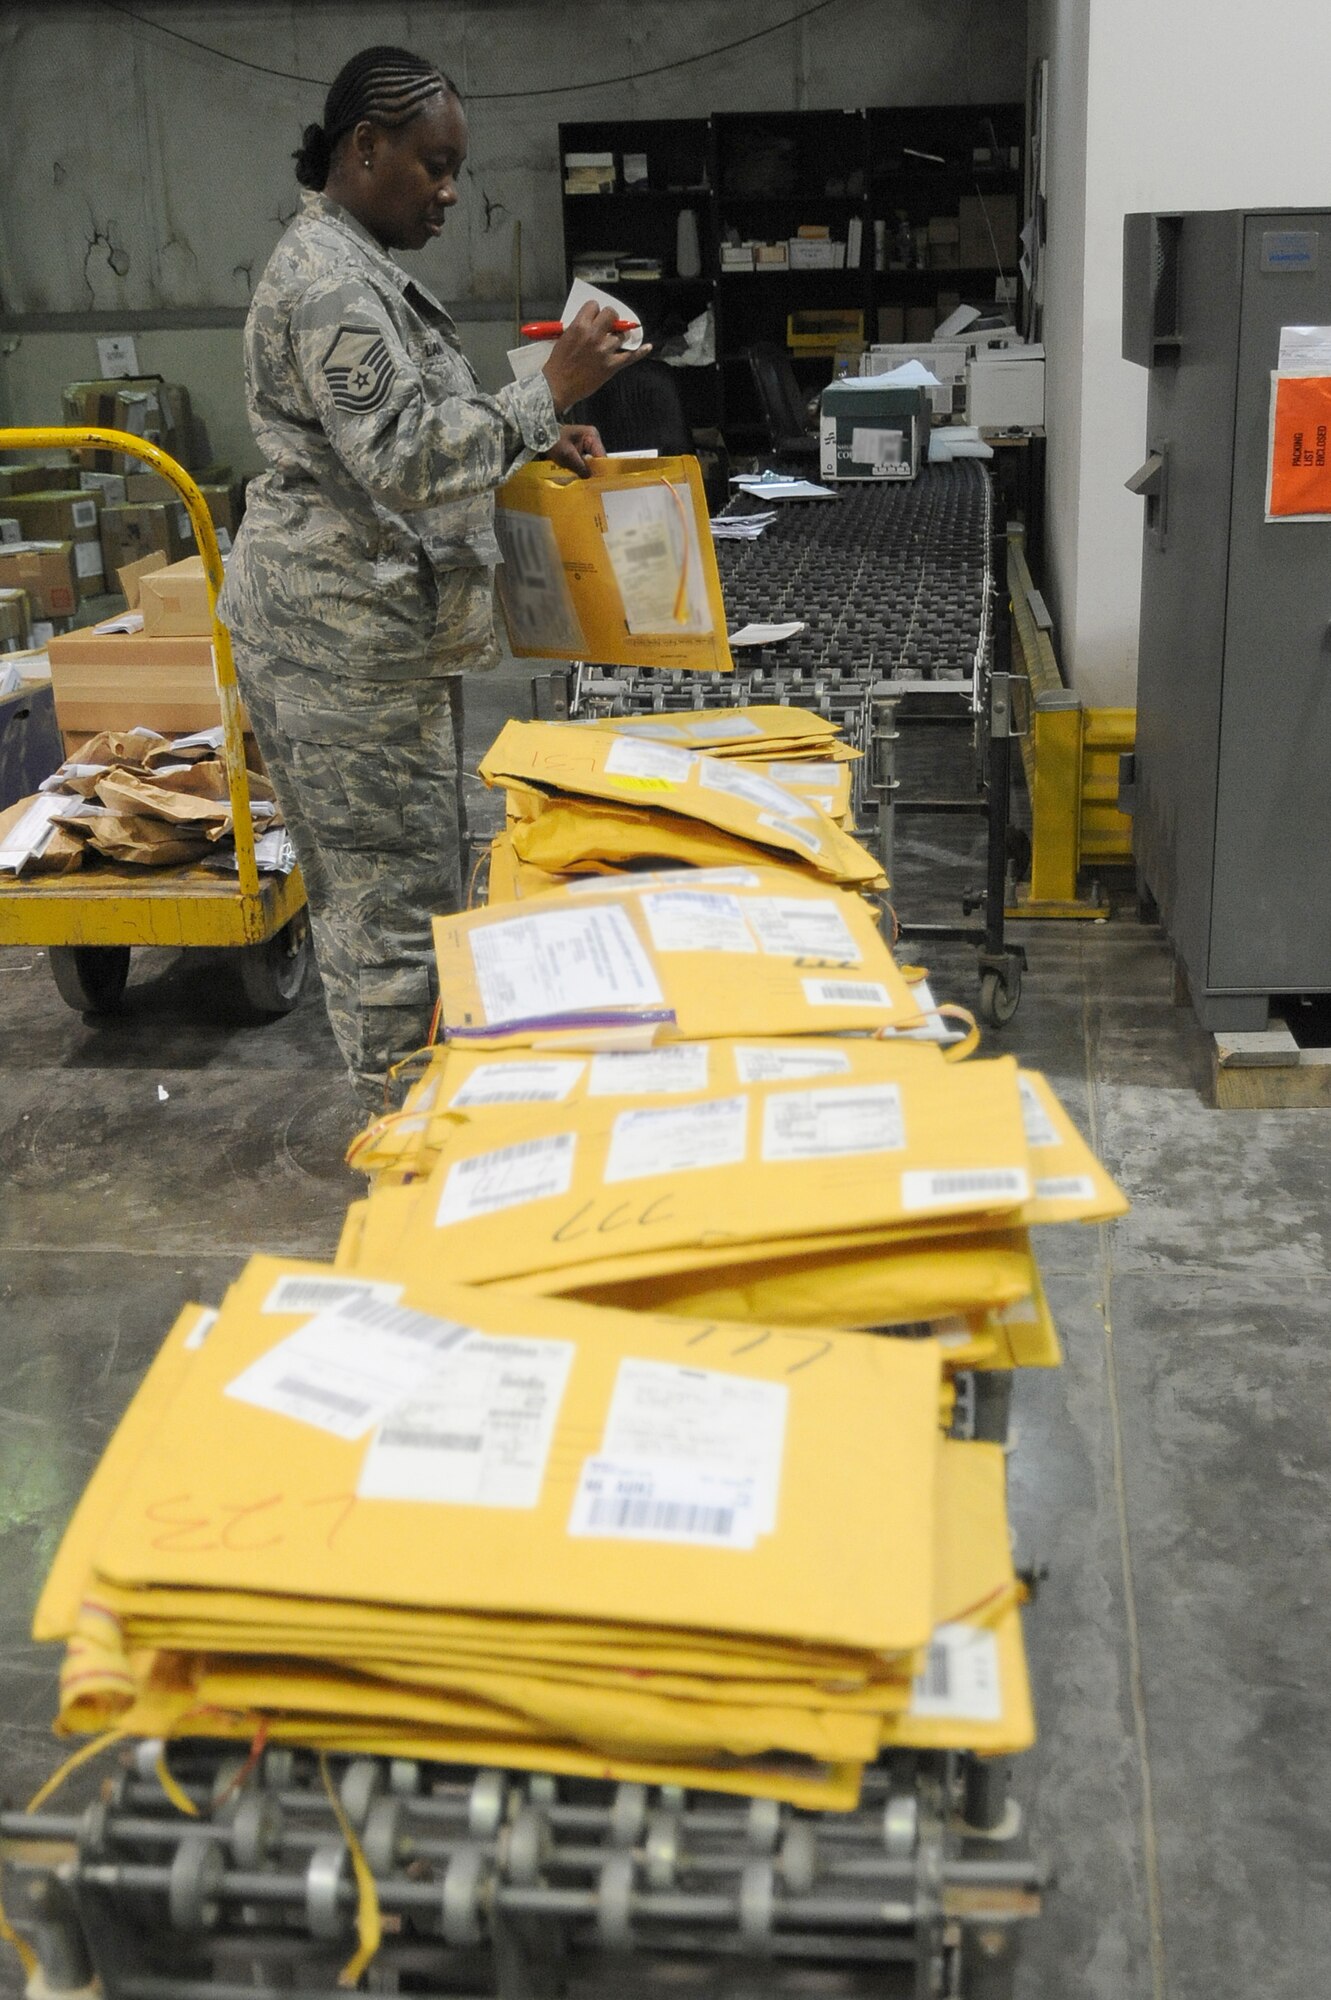 Master Sgt. Dorothy Langford, 380th Expeditionary Logistics Readiness Squadron, checks inbound packages, April 24 at an undisclosed location in Southwest Asia. The receiving section verifies stock numbers and accounts for each item, matching it against the packing slip to ensure all items have arrived. Sergeant Langford is deployed from Spagdahlem AB, Germany and hails from Columbus, Miss. (U.S. Air Force photo by Senior Airman Brian J. Ellis) (Released)